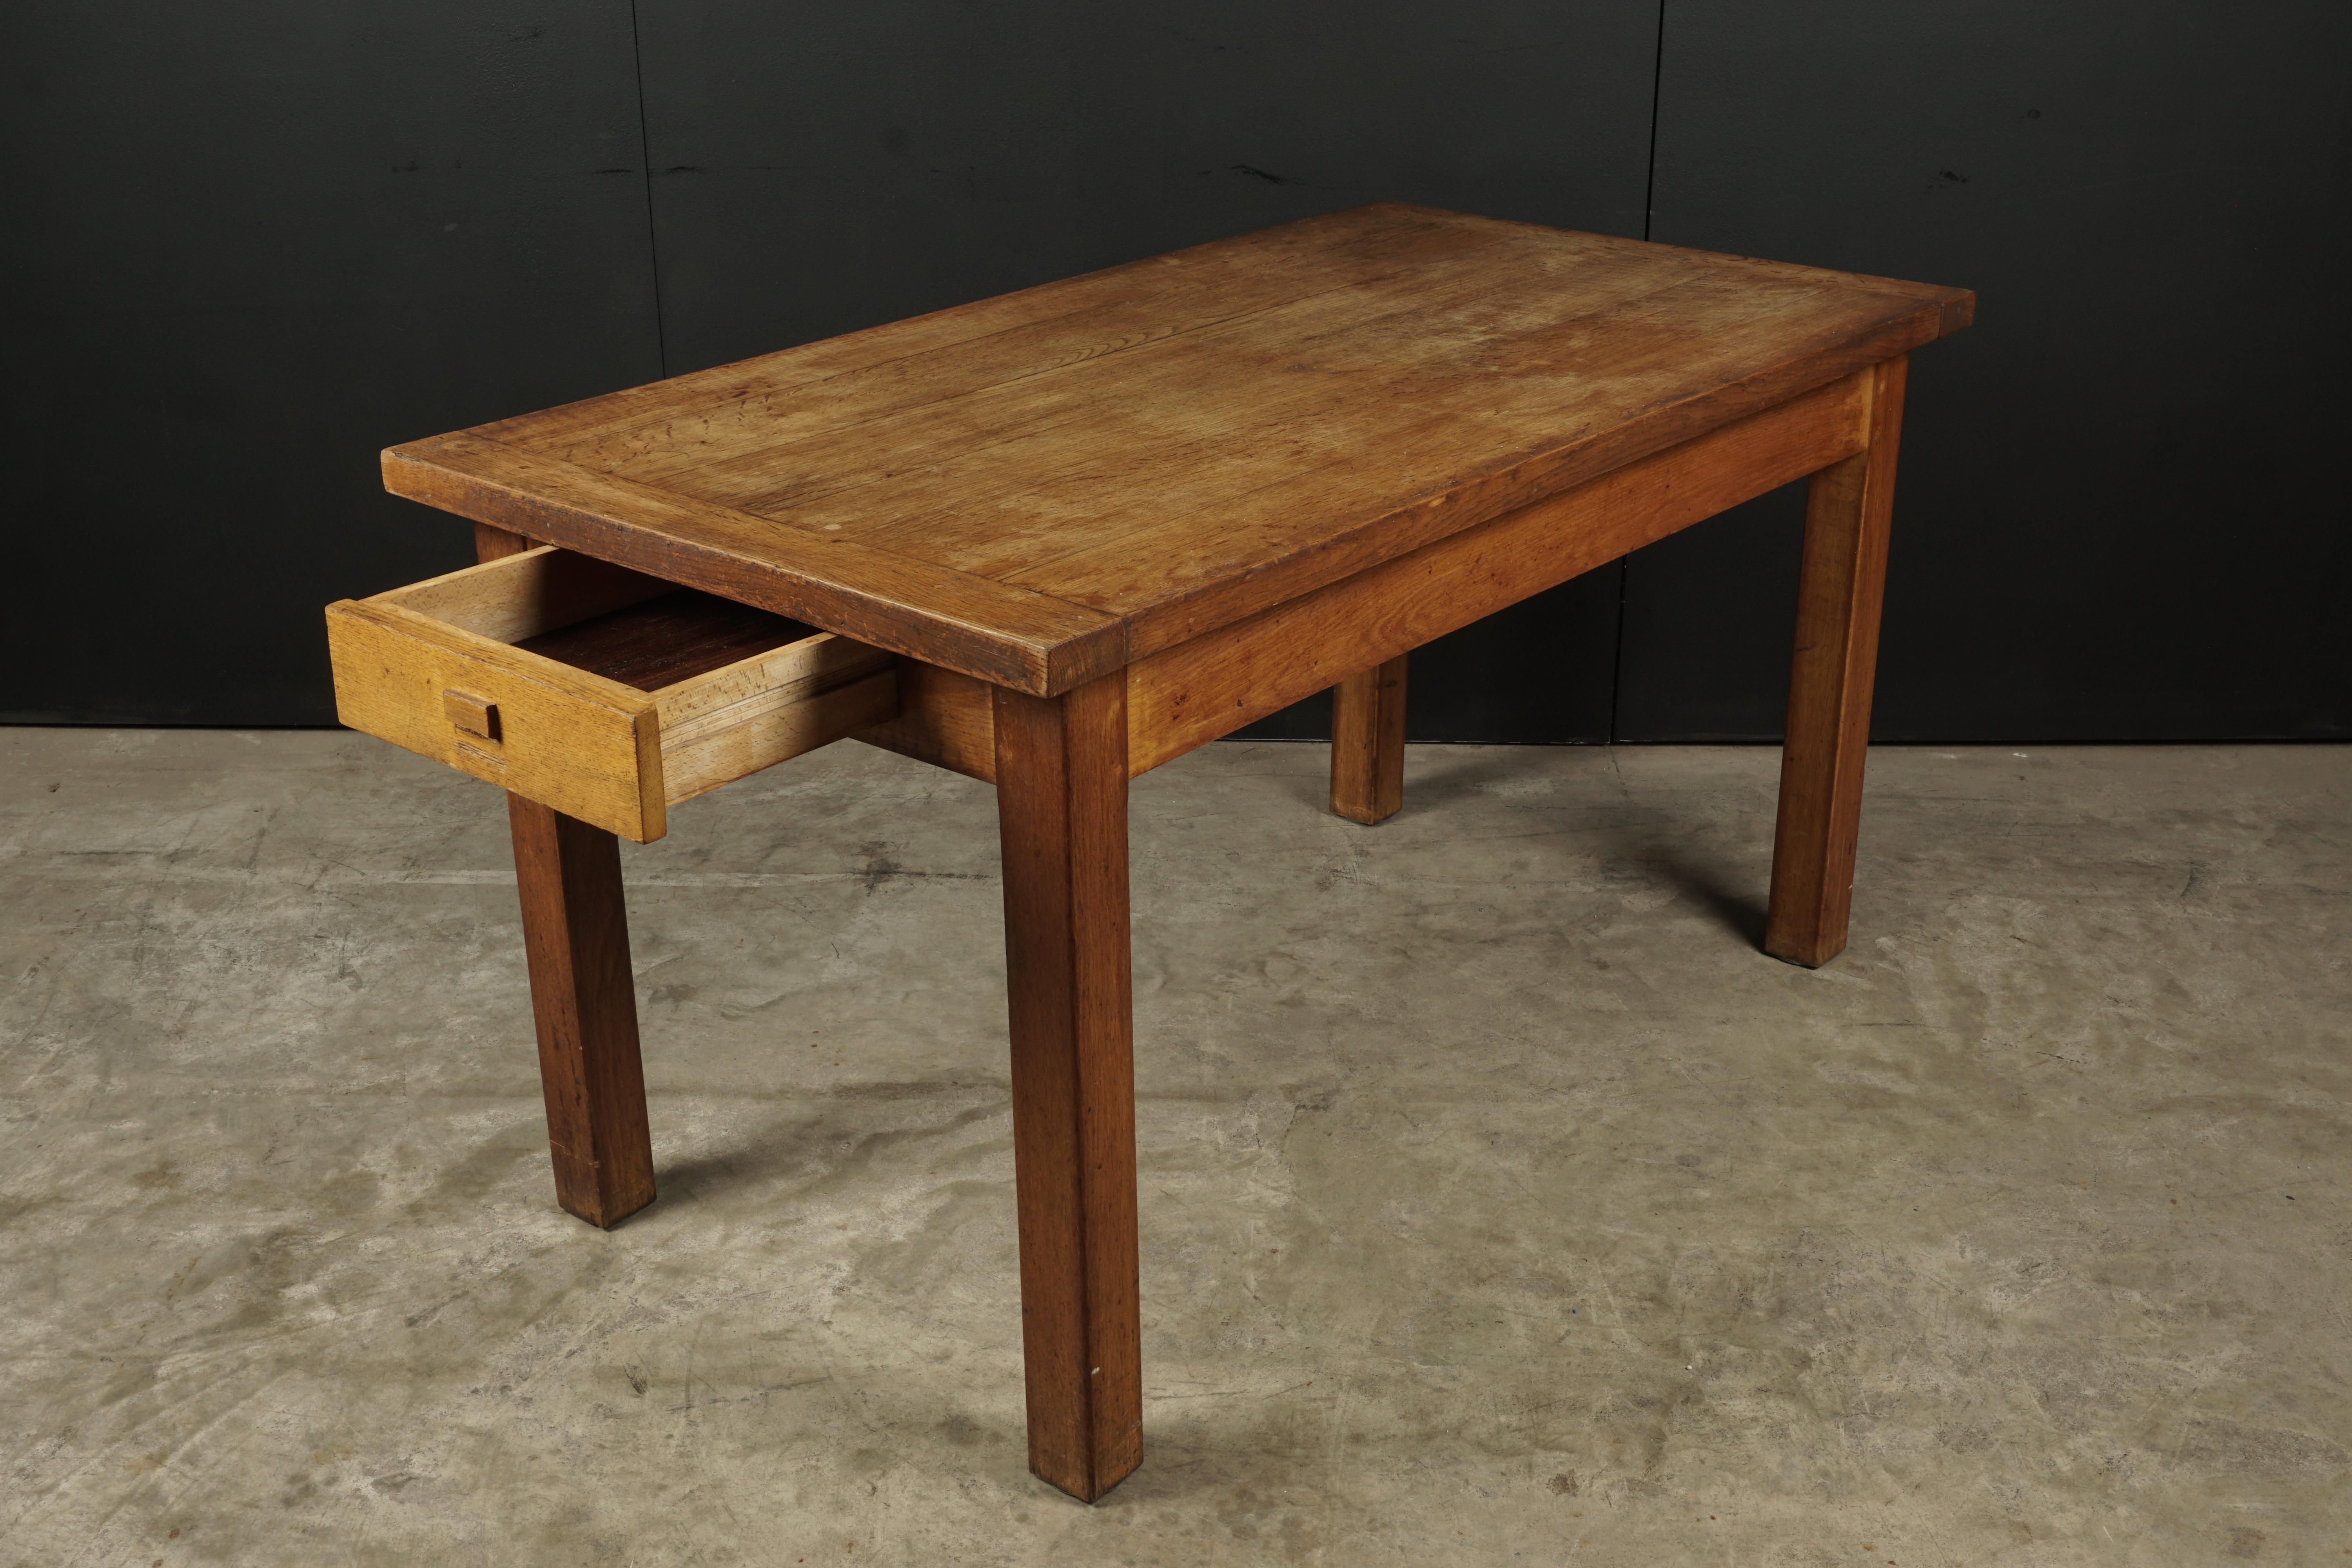 Midcentury desk from France, circa 1950. Solid pine construction with one drawer. Great patina and wear.